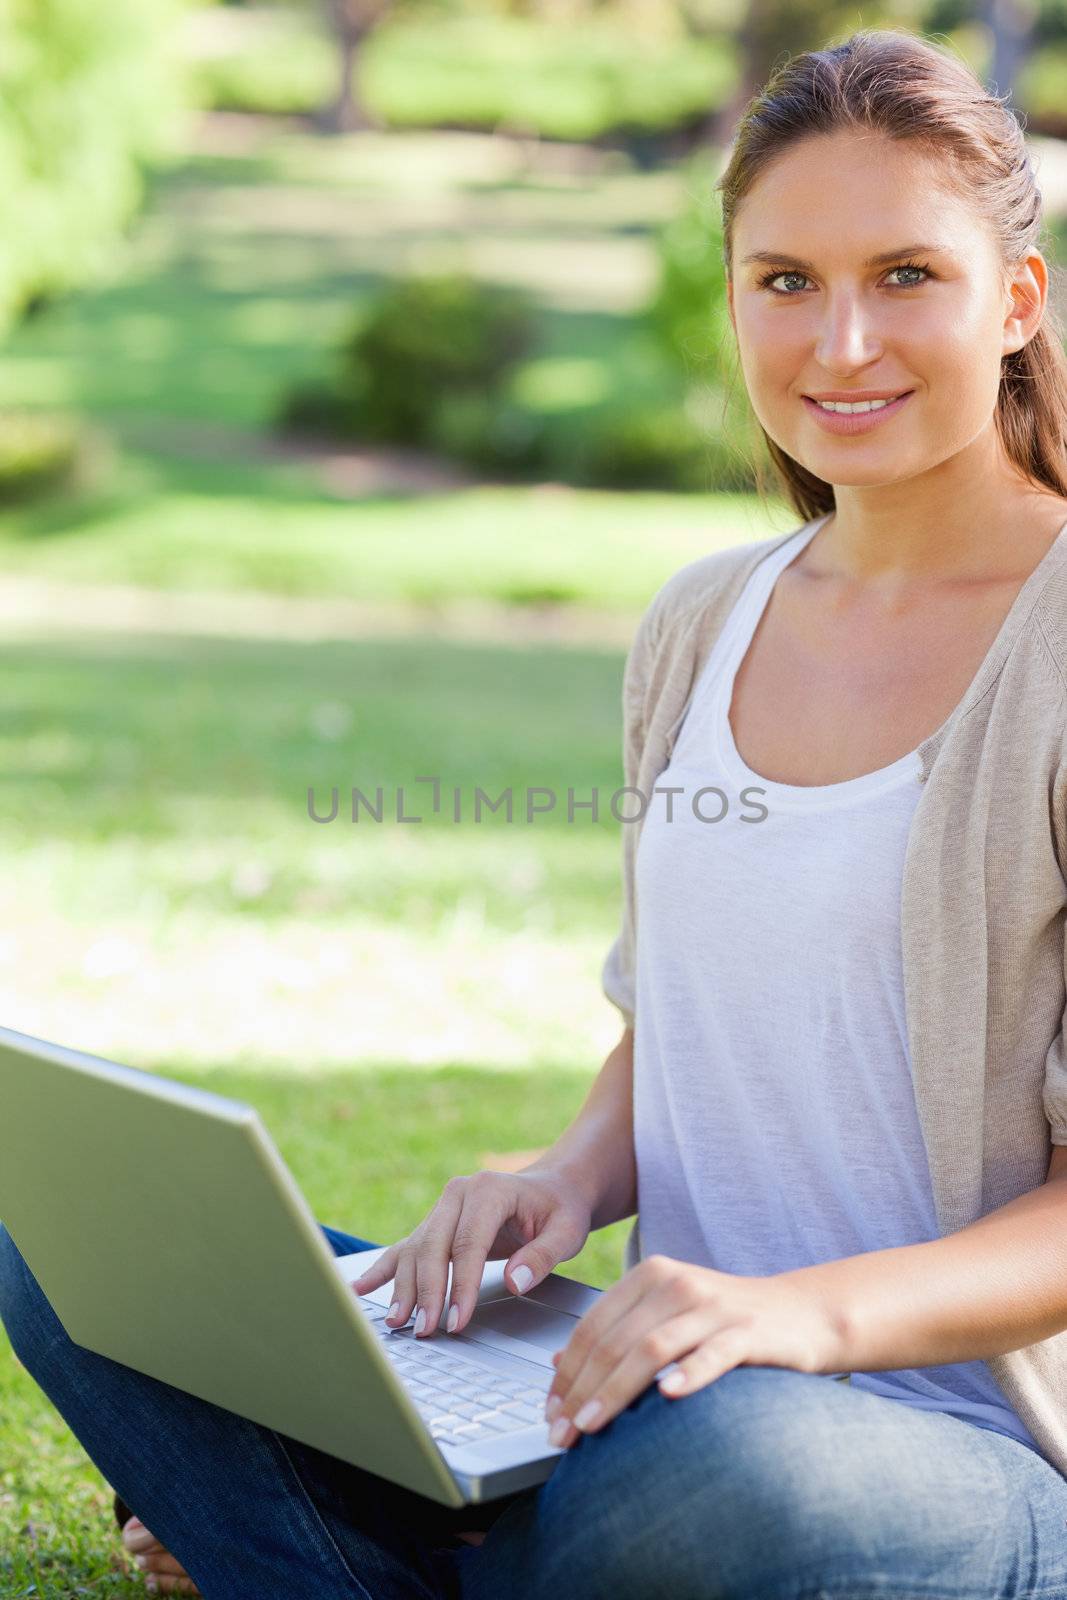 Smiling young woman working on her laptop in the park